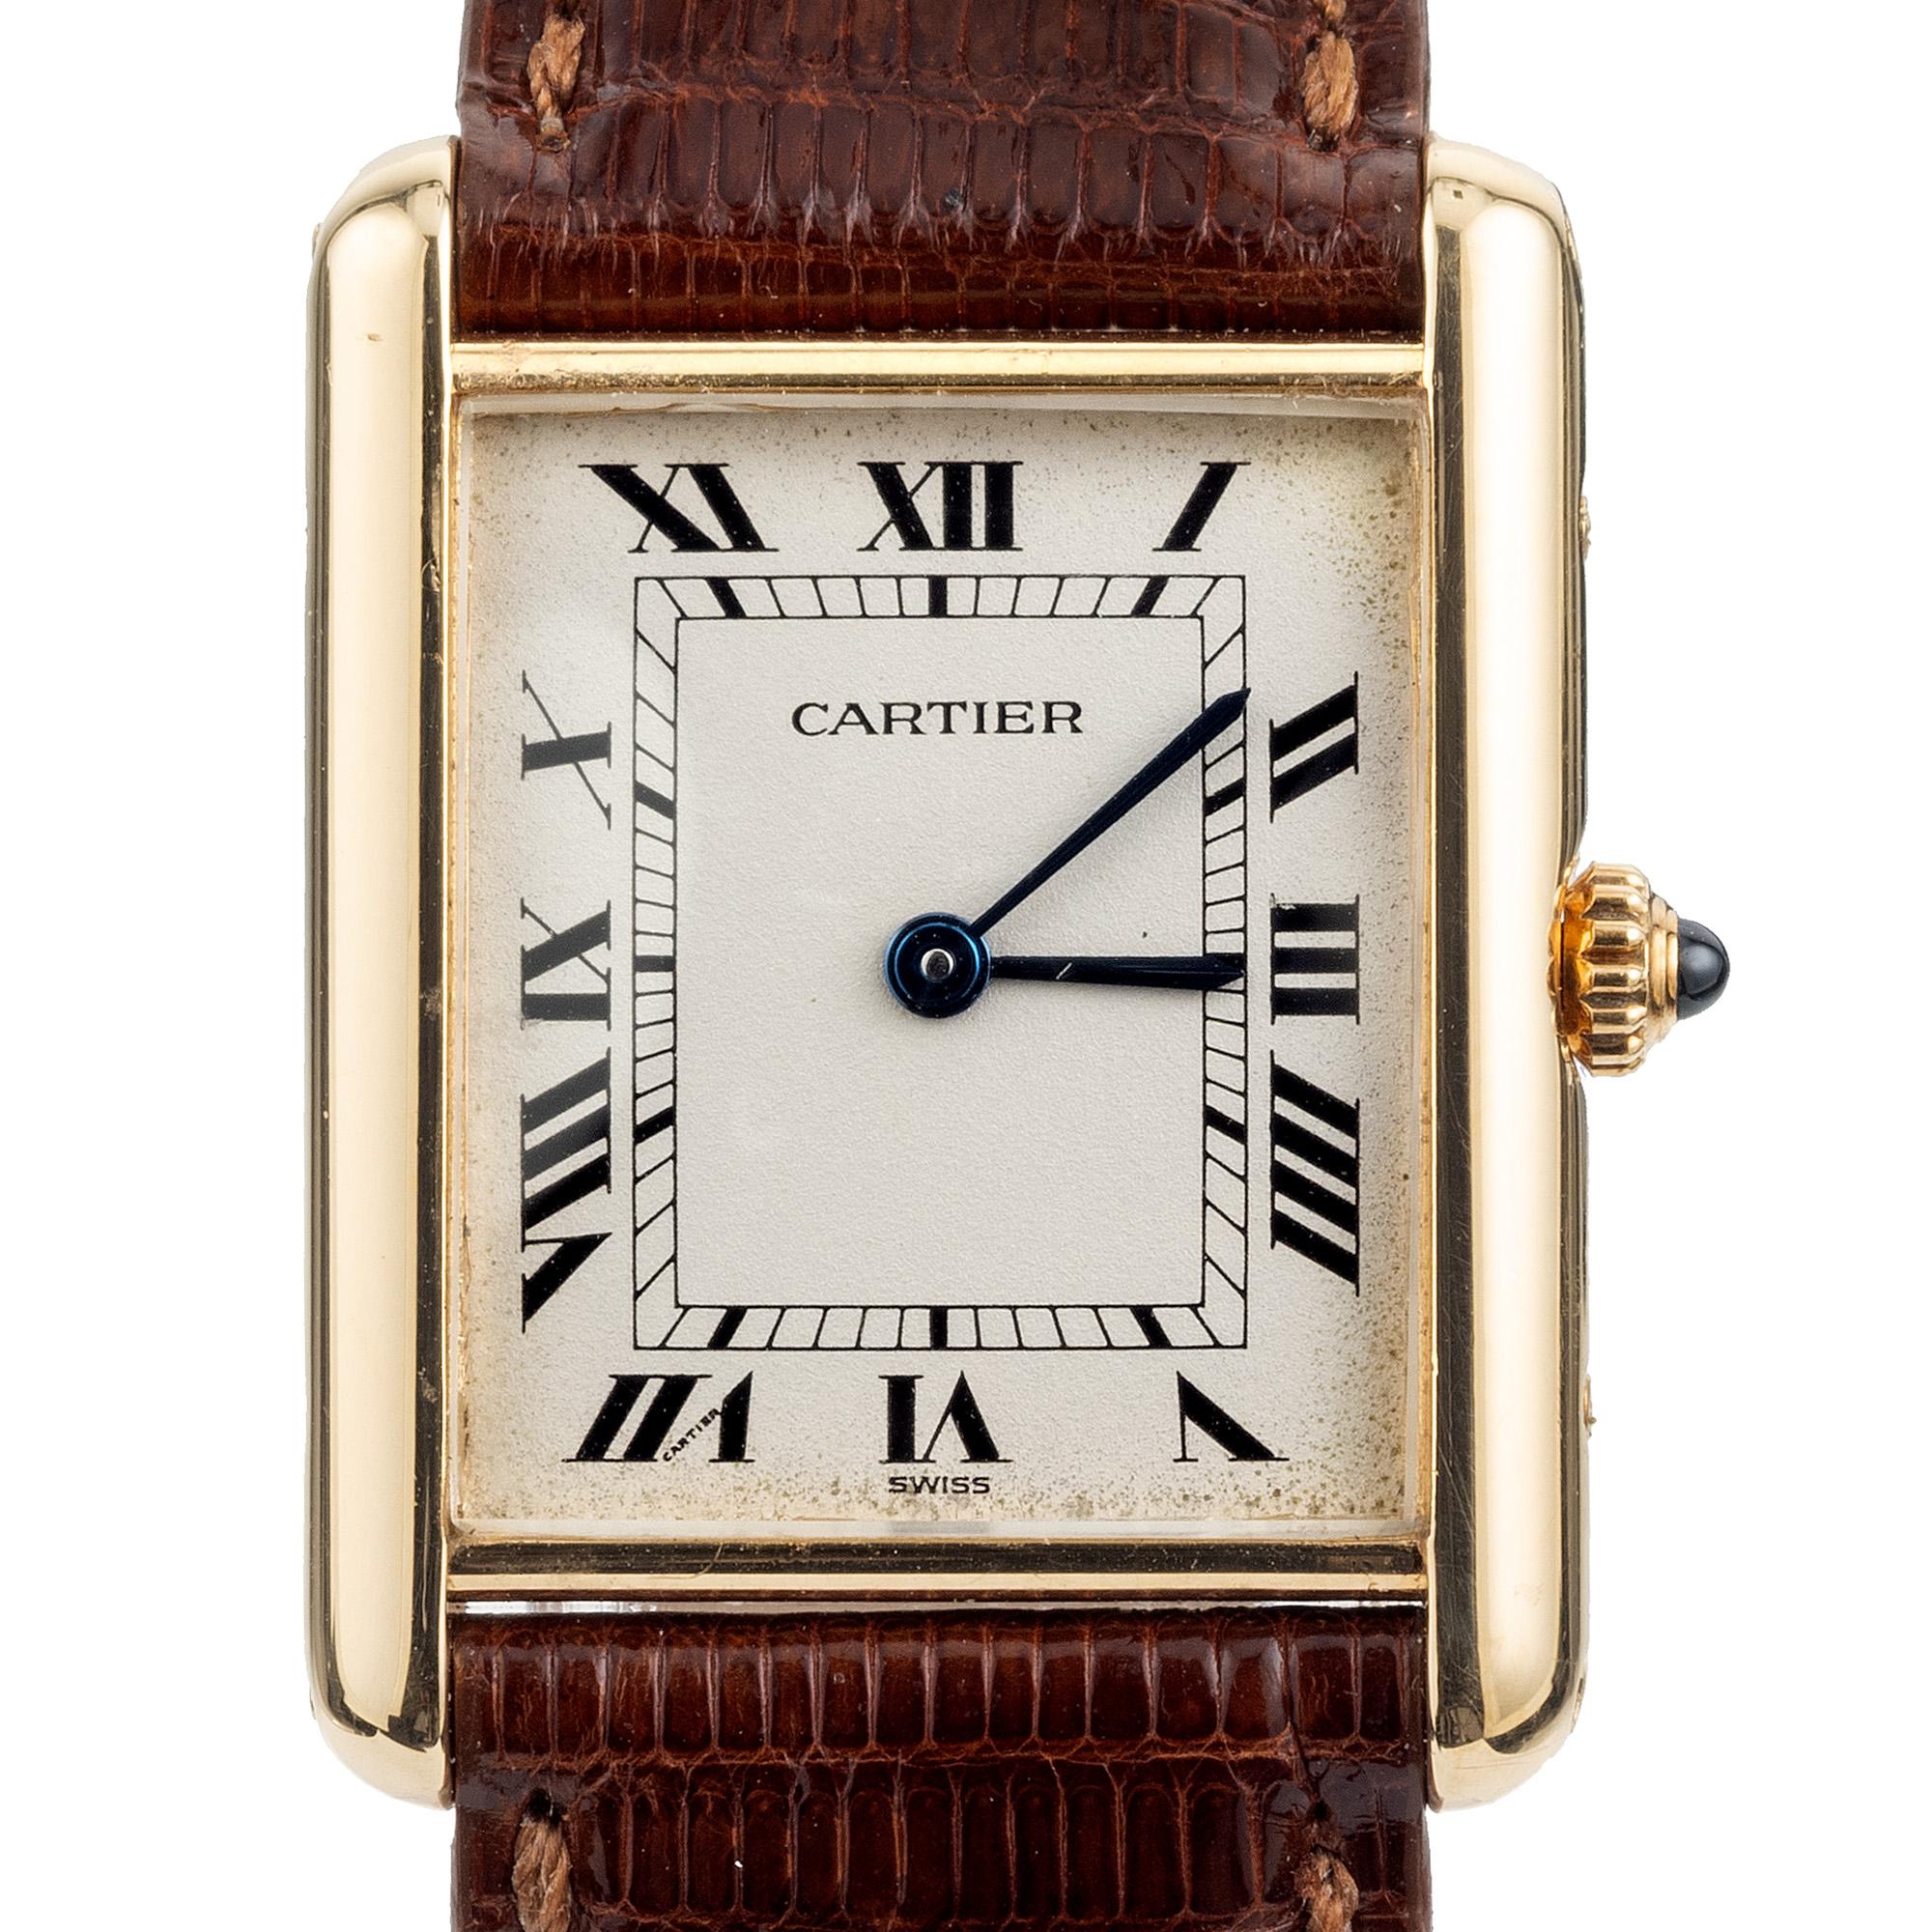 Cartier Tank Louis wristwatch. The sleek rectangular 18k yellow gold 23mm case is a hallmark of Cartier's timeless heritage and craftsmanship. Parchment Roman numeral dial and new Cartier band. 18k Cartier buckle. The absence of a date feature